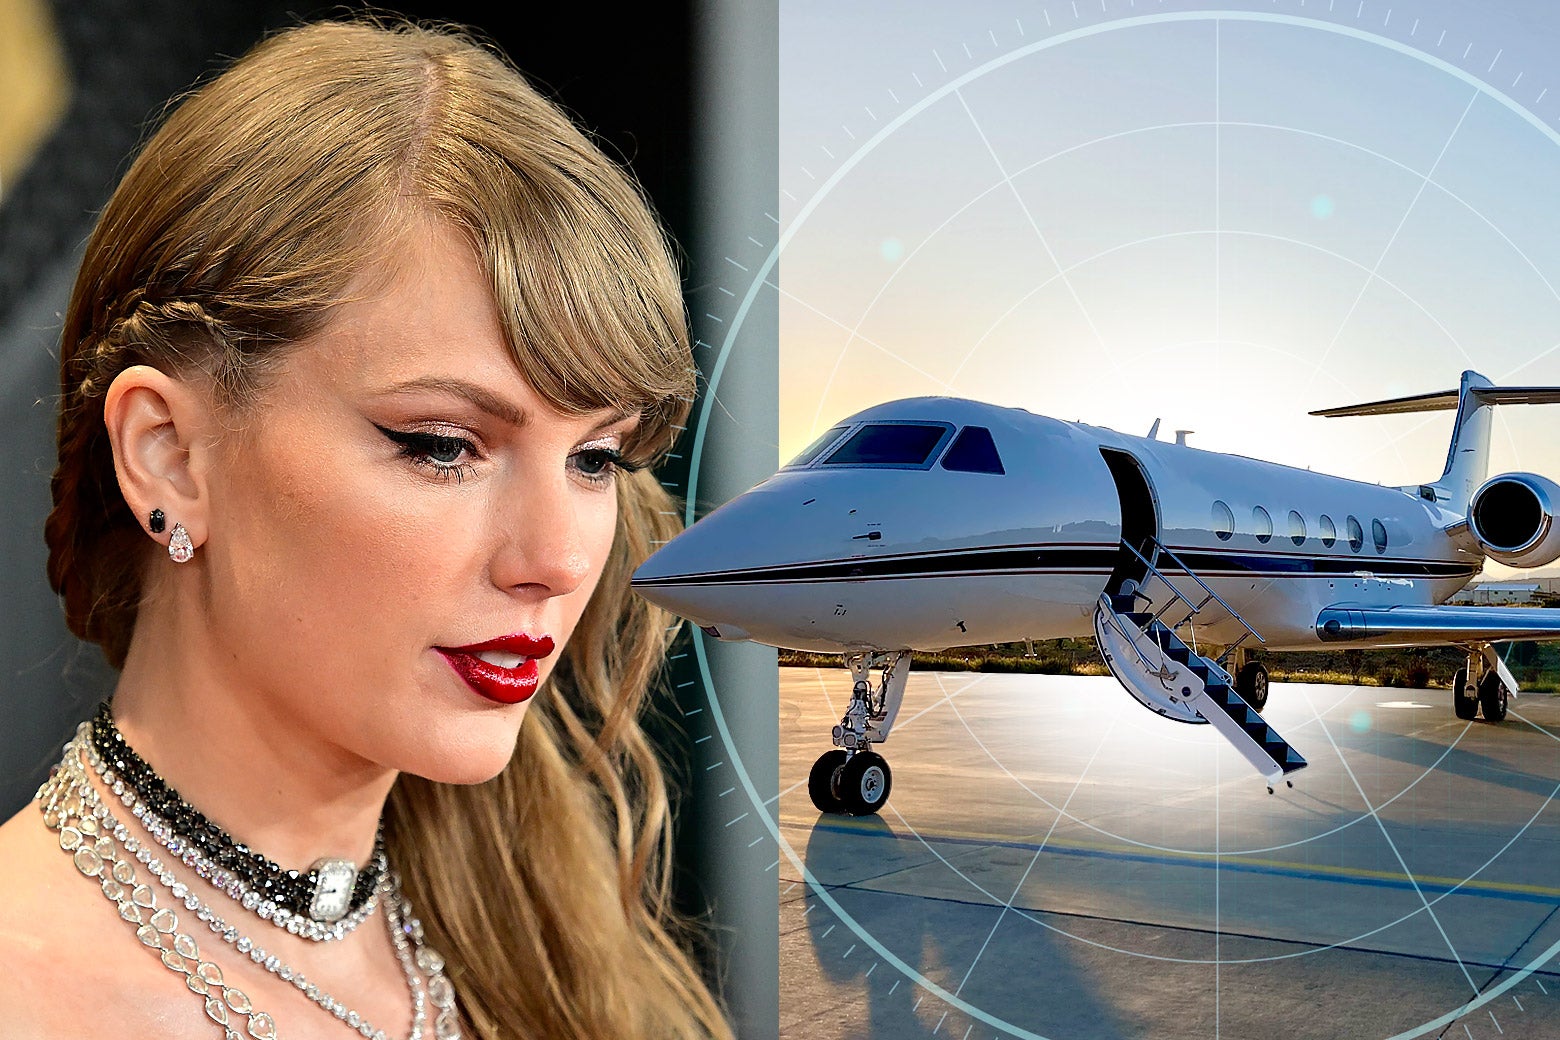 Can Taylor Swift Really Sue the College Student Tracking Her Private Jet? A Legal Expert Weighs In. Nadira Goffe